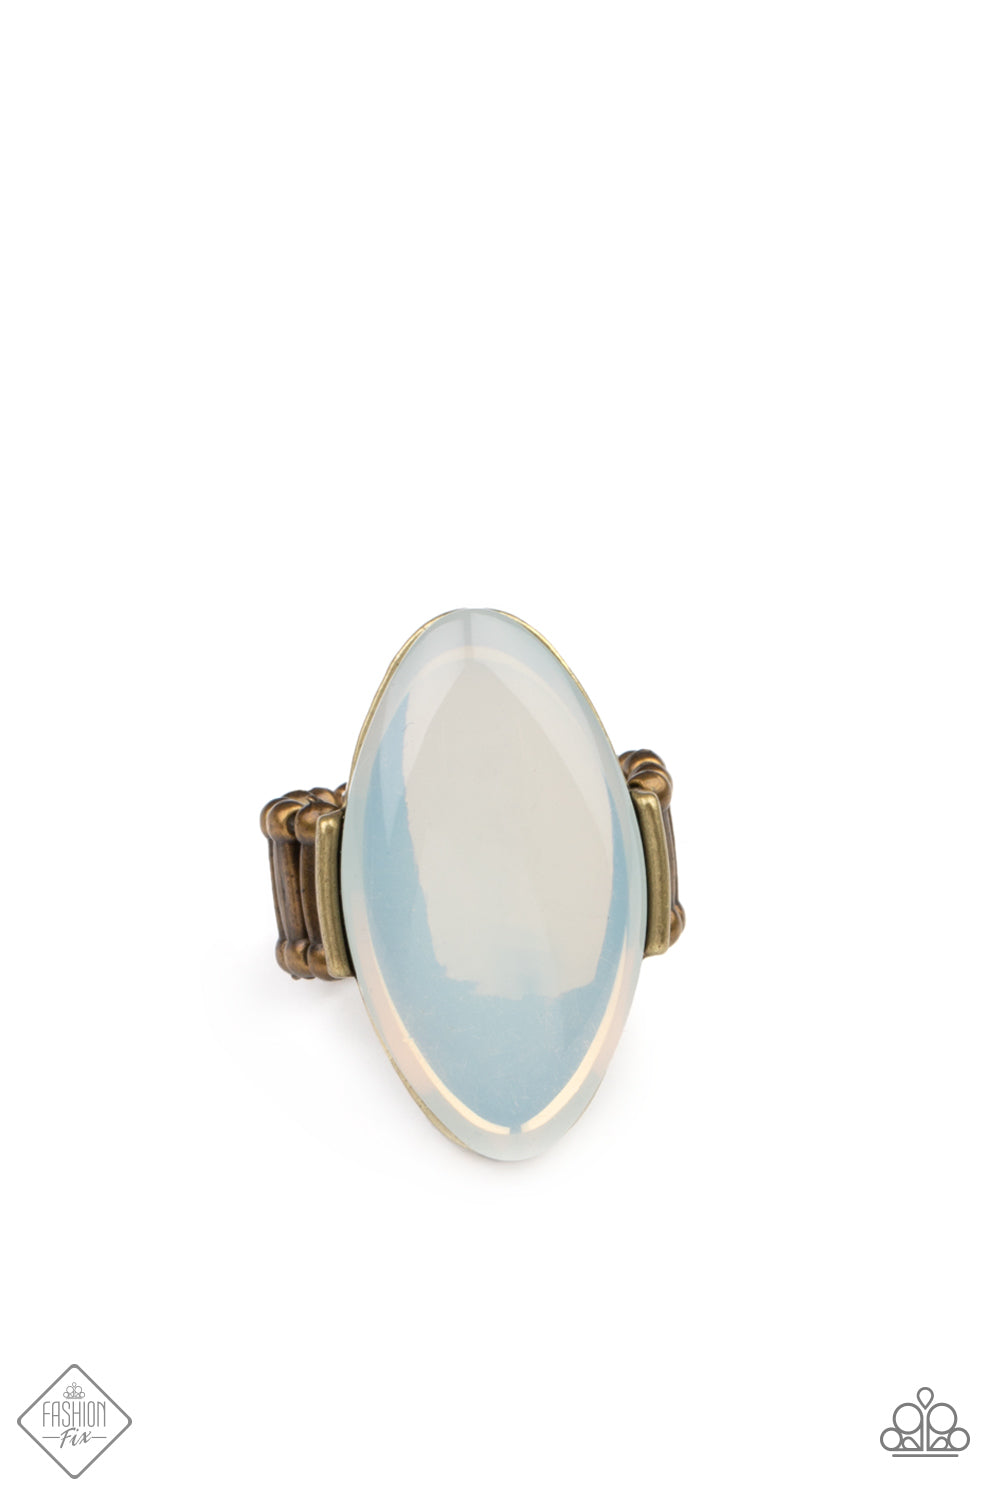 Opal Odyssey Brass & White Ring May 2021 Fashion Fix Exclusive - Princess Glam Shop